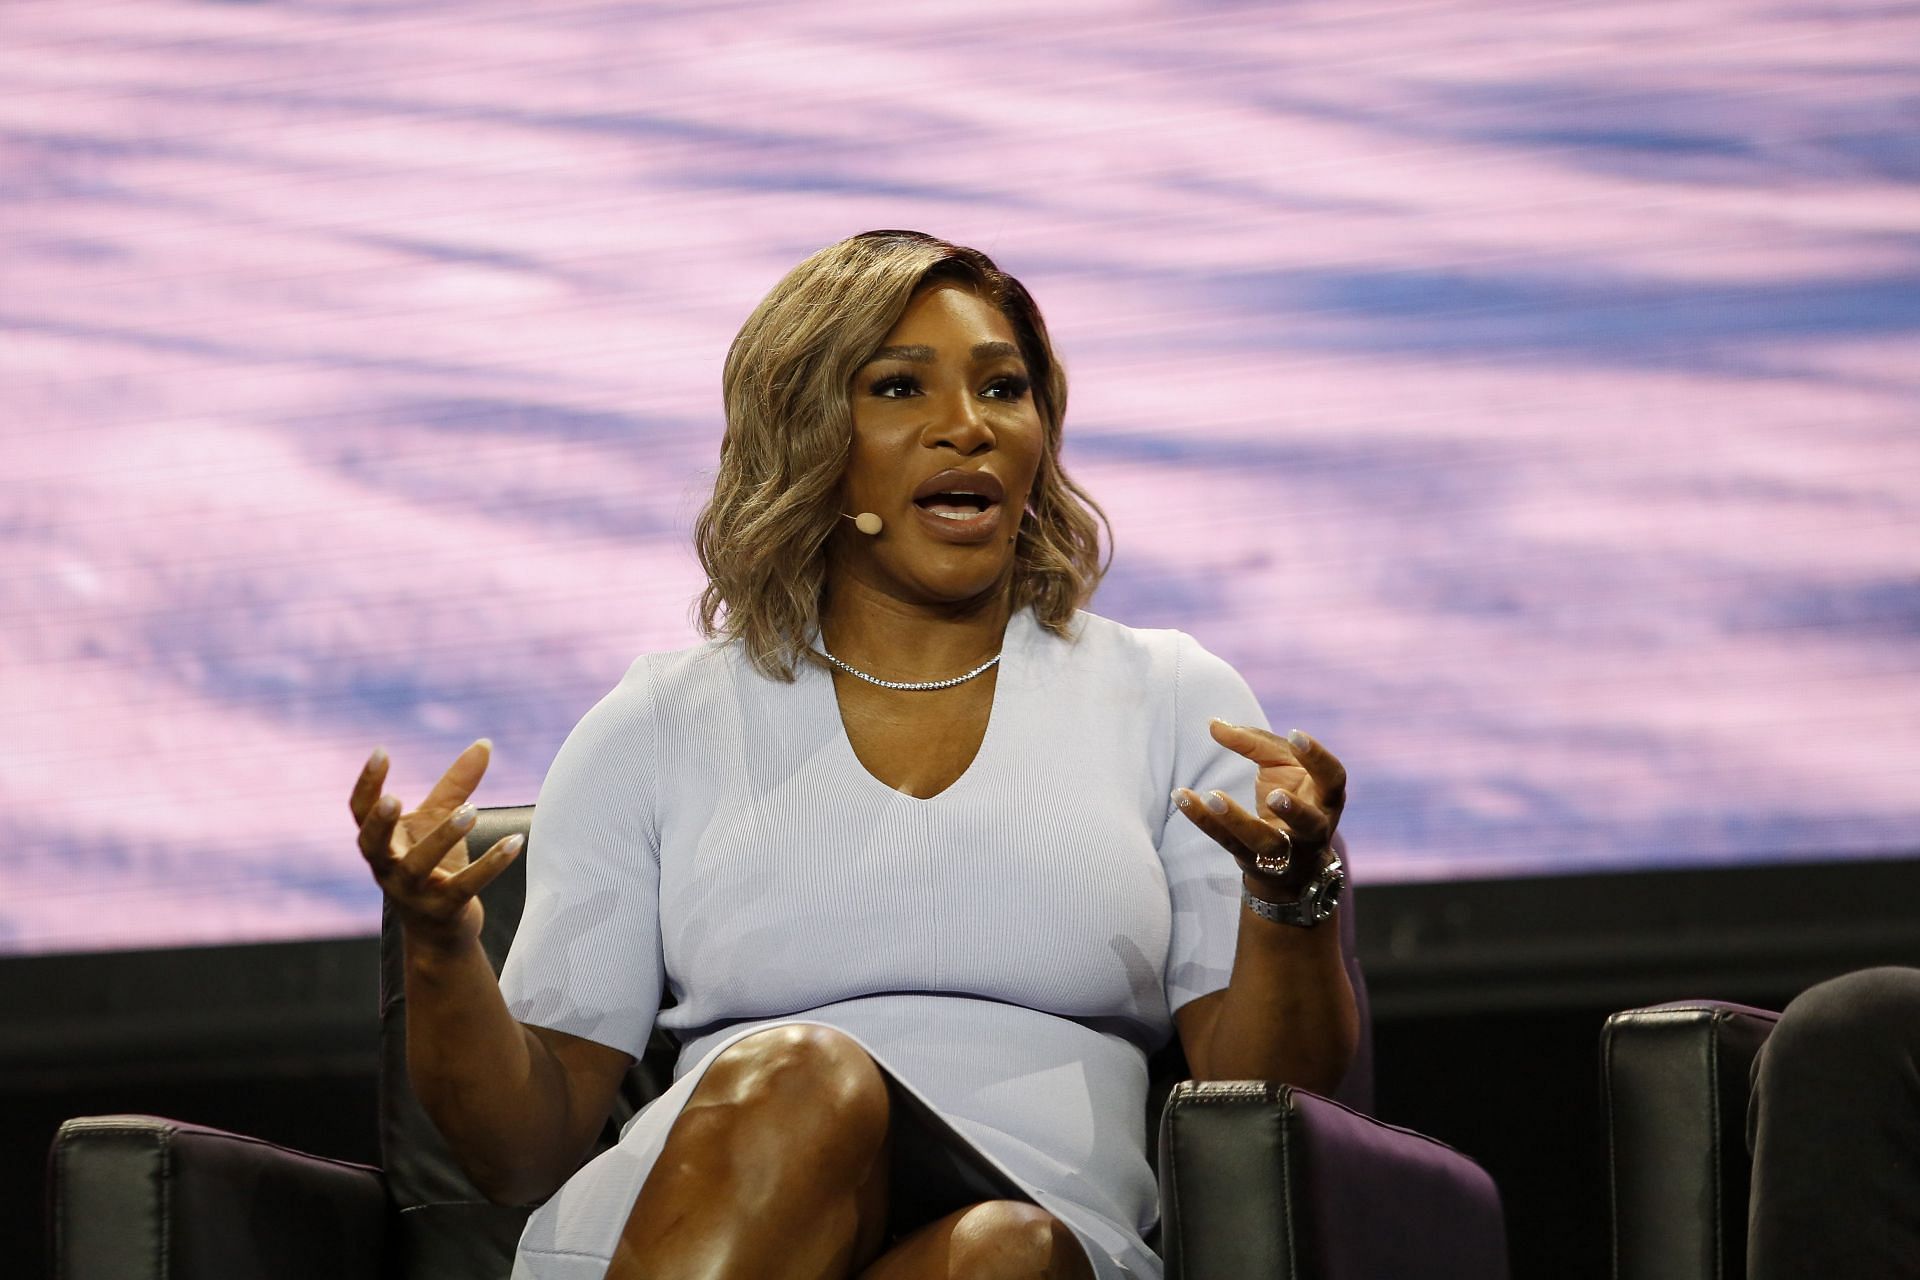 Serena Williams speaking during the Bitcoin 2022 Conference in Miami.